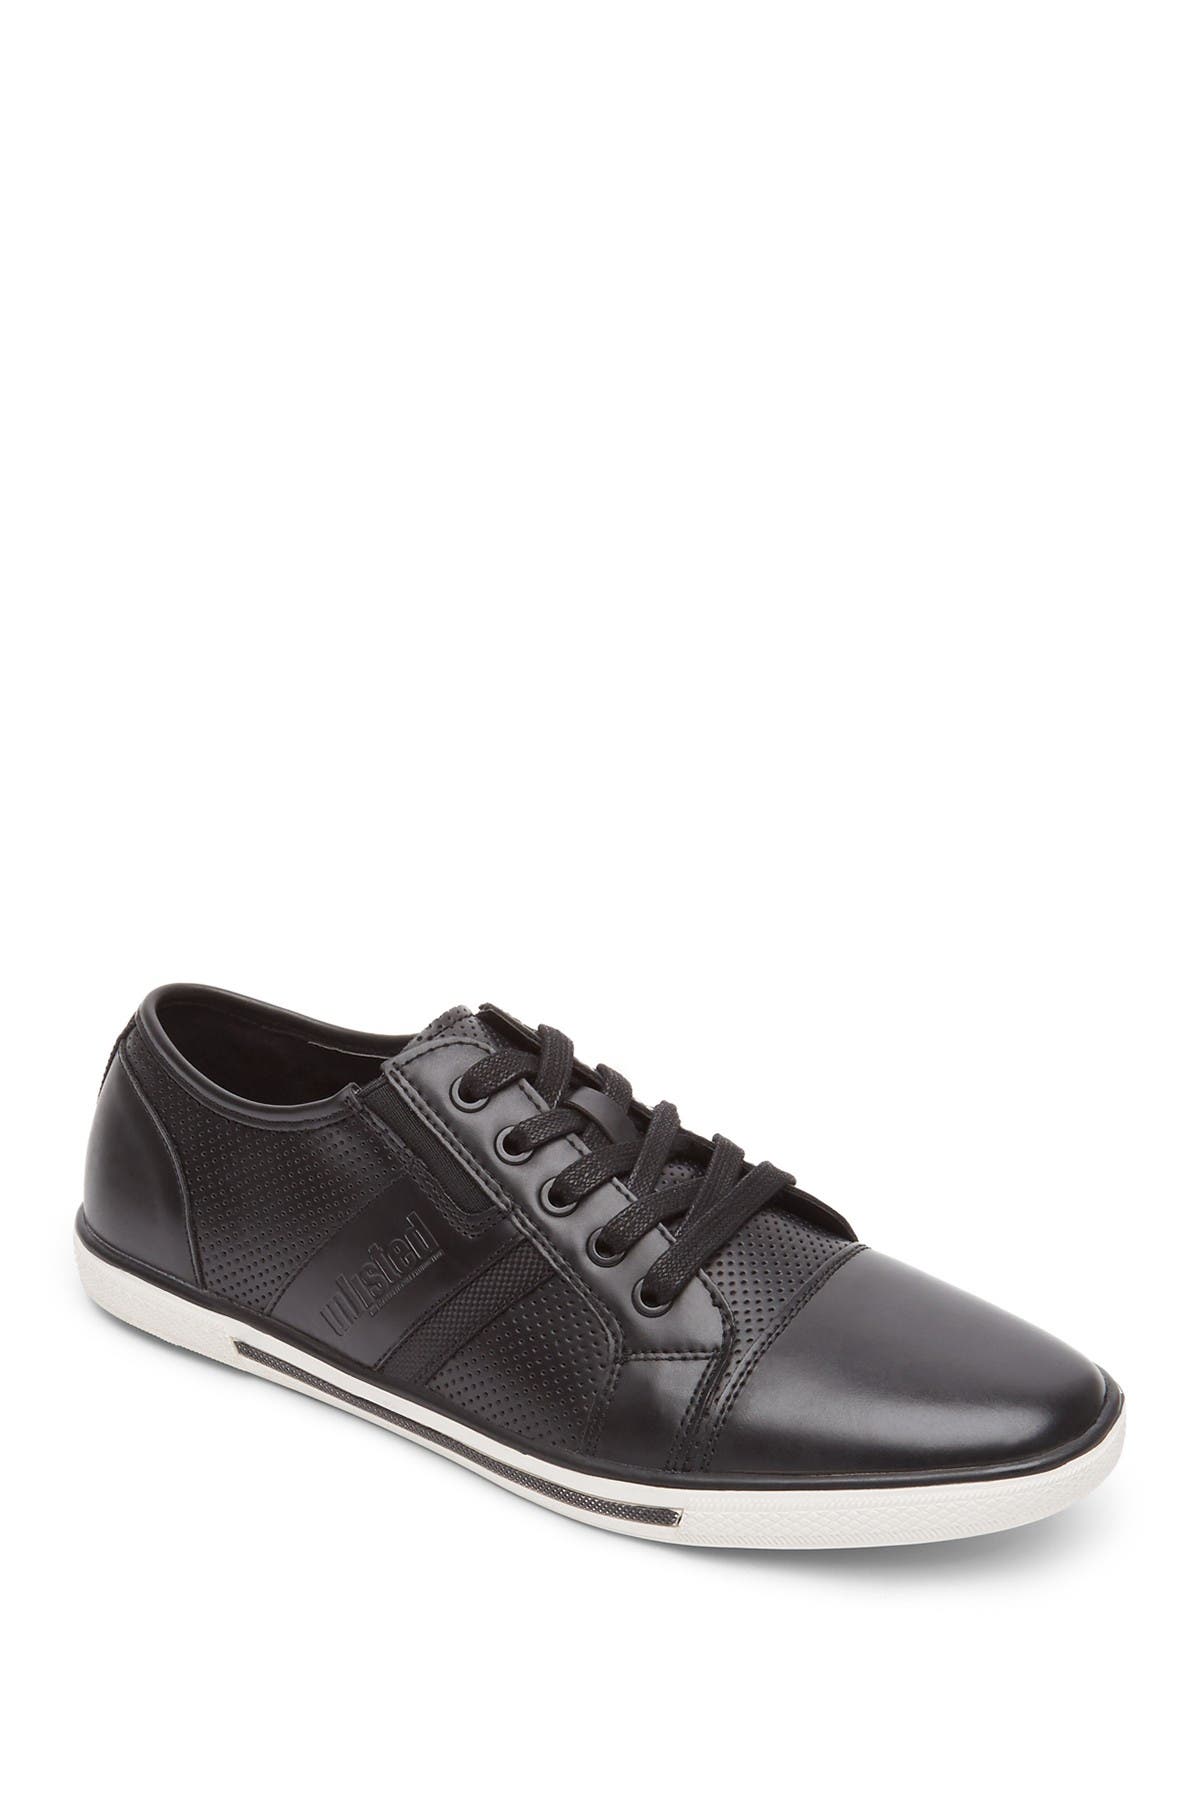 kenneth cole unlisted crown sneaker